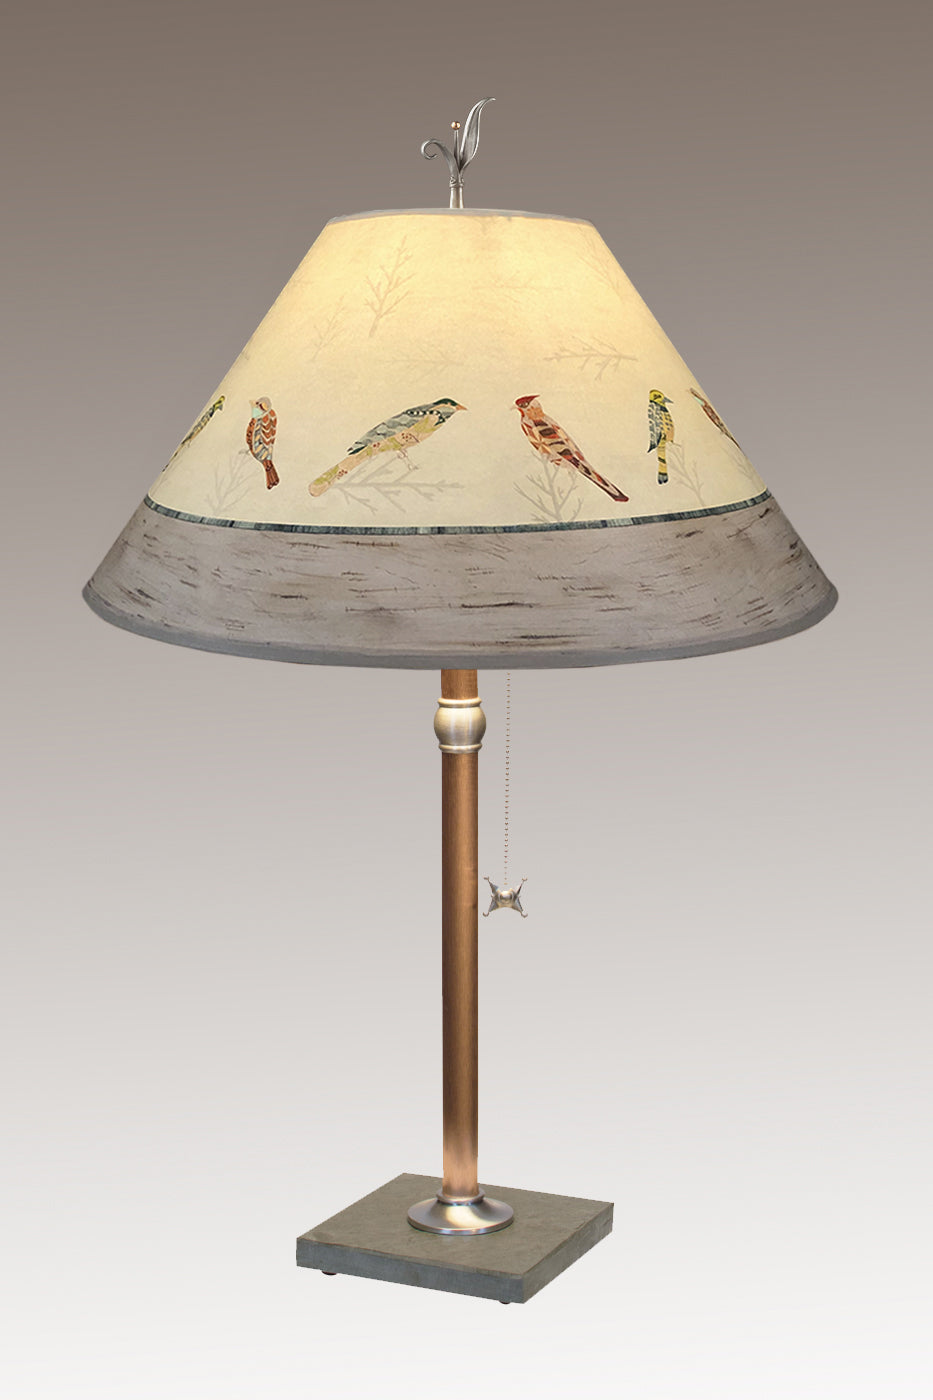 Janna Ugone & Co Table Lamps Copper Table Lamp with Large Conical Shade in Bird Friends